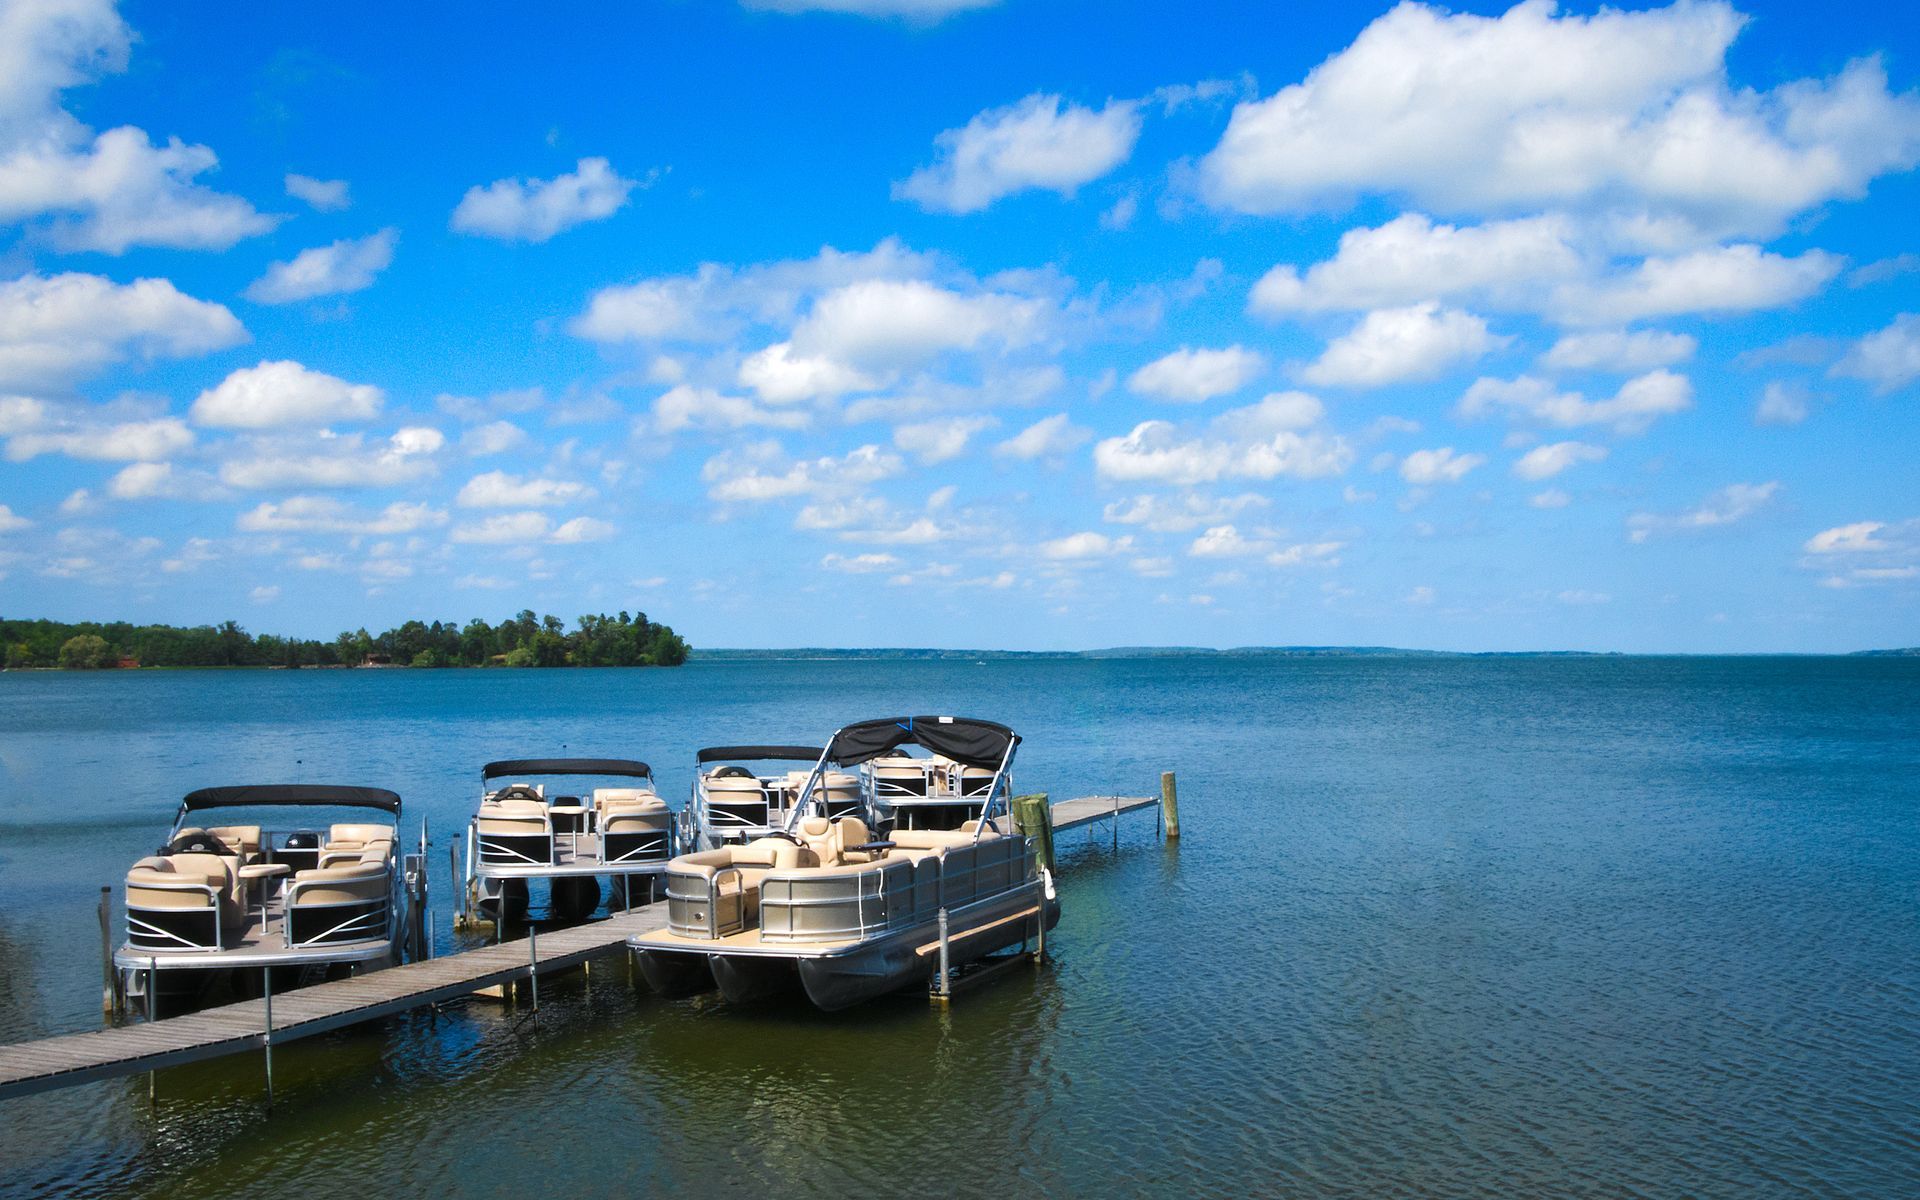 three pontoon boats are docked at a dock on a lake .